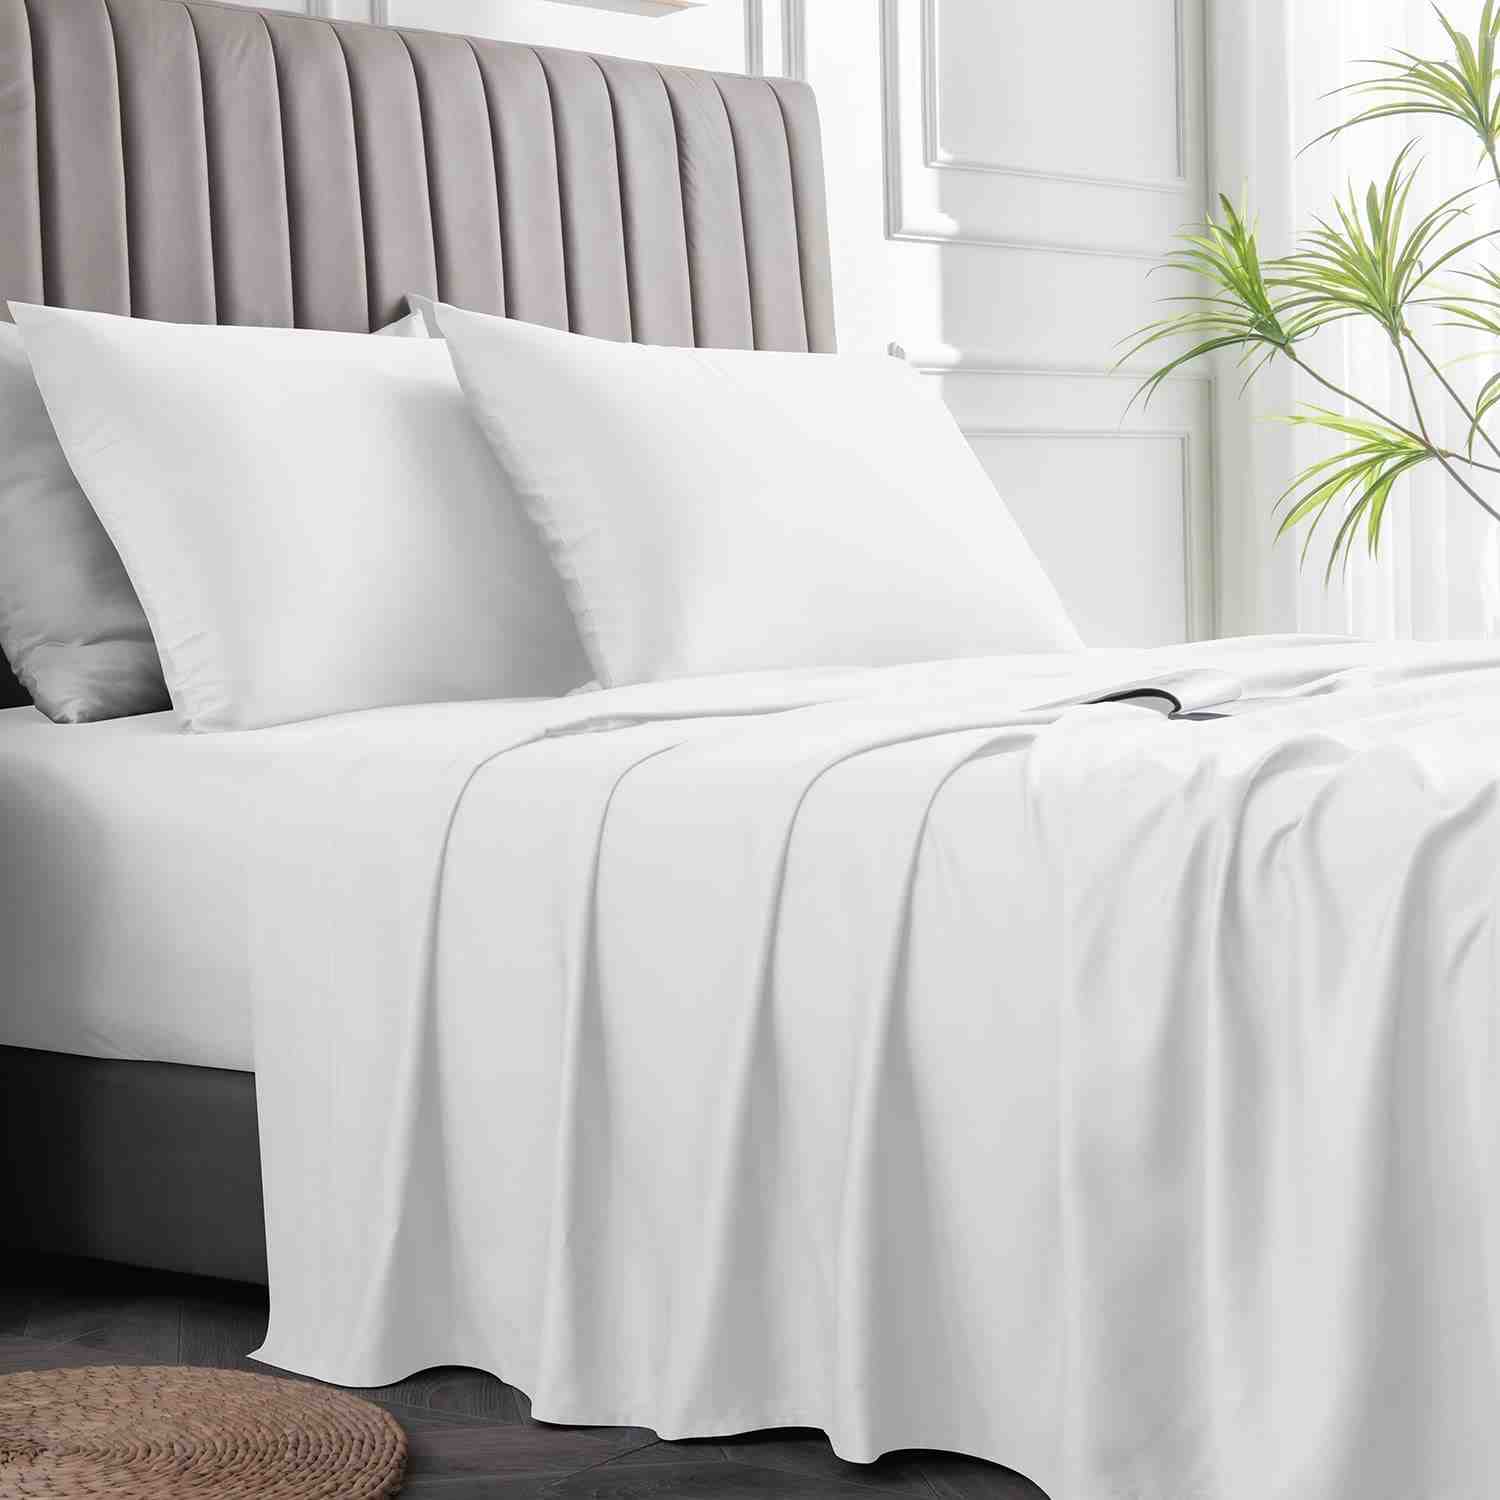 What are the disadvantages of bamboo sheets?